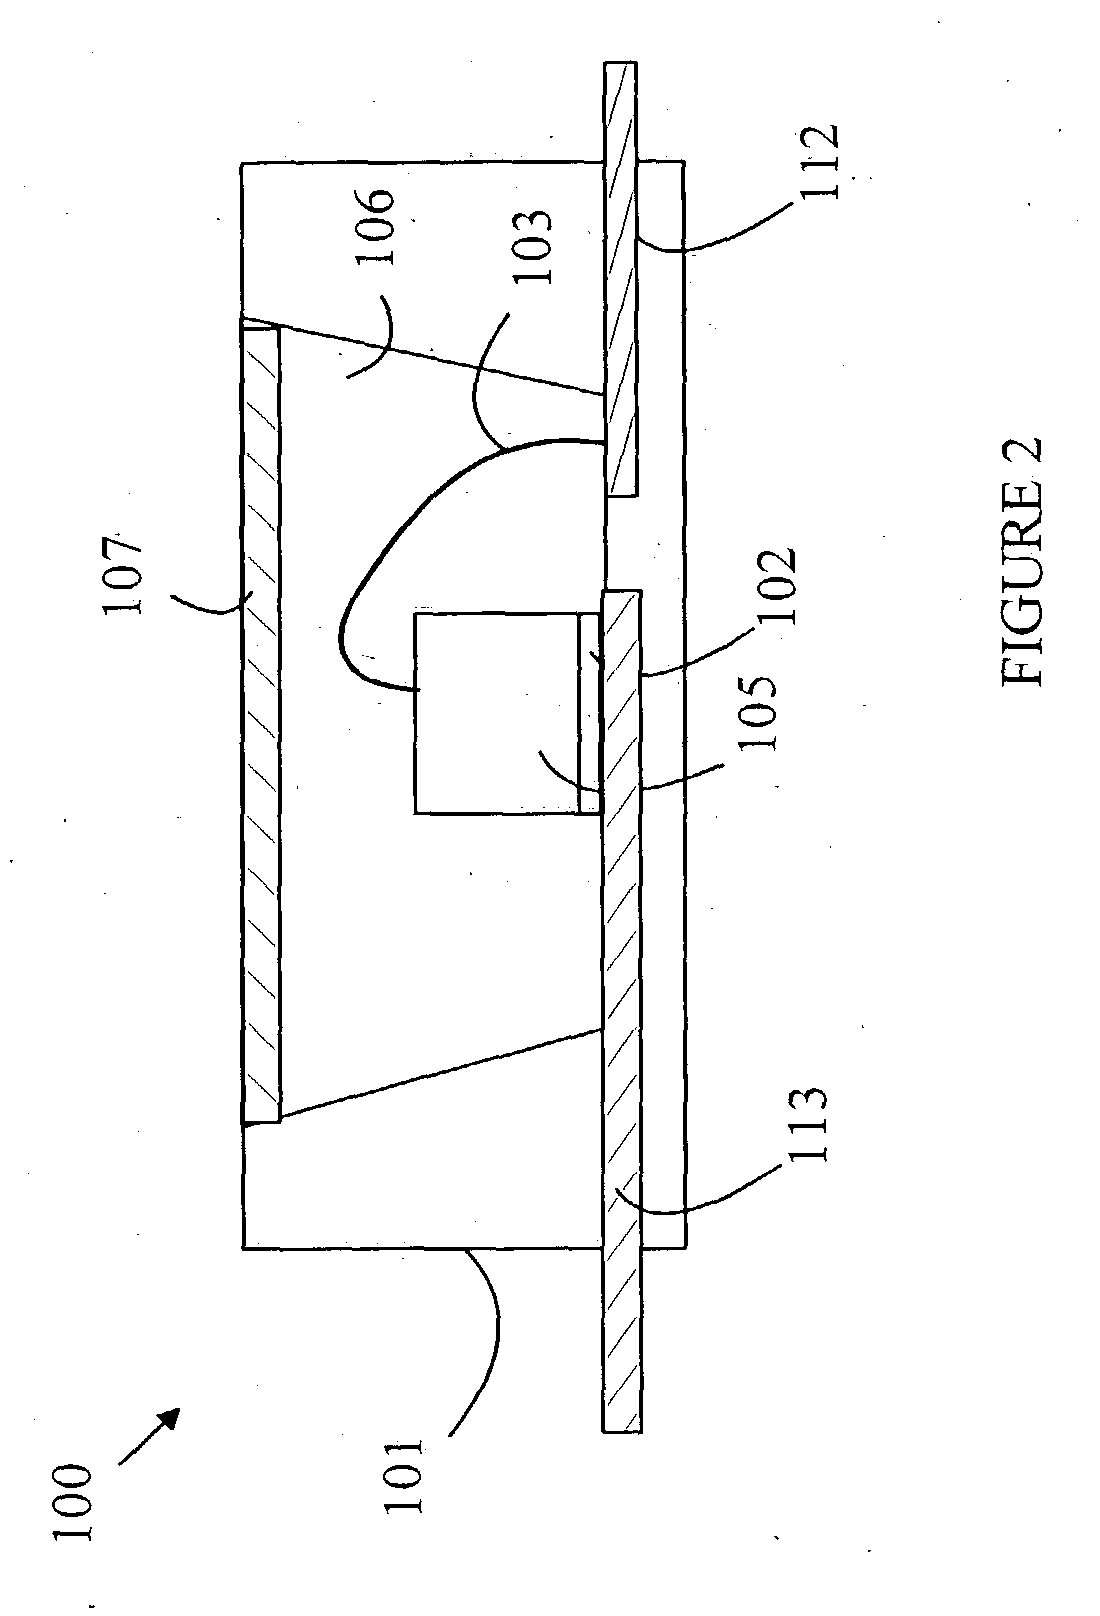 Light emitting diode utilizing a discrete wavelength-converting layer for color conversion